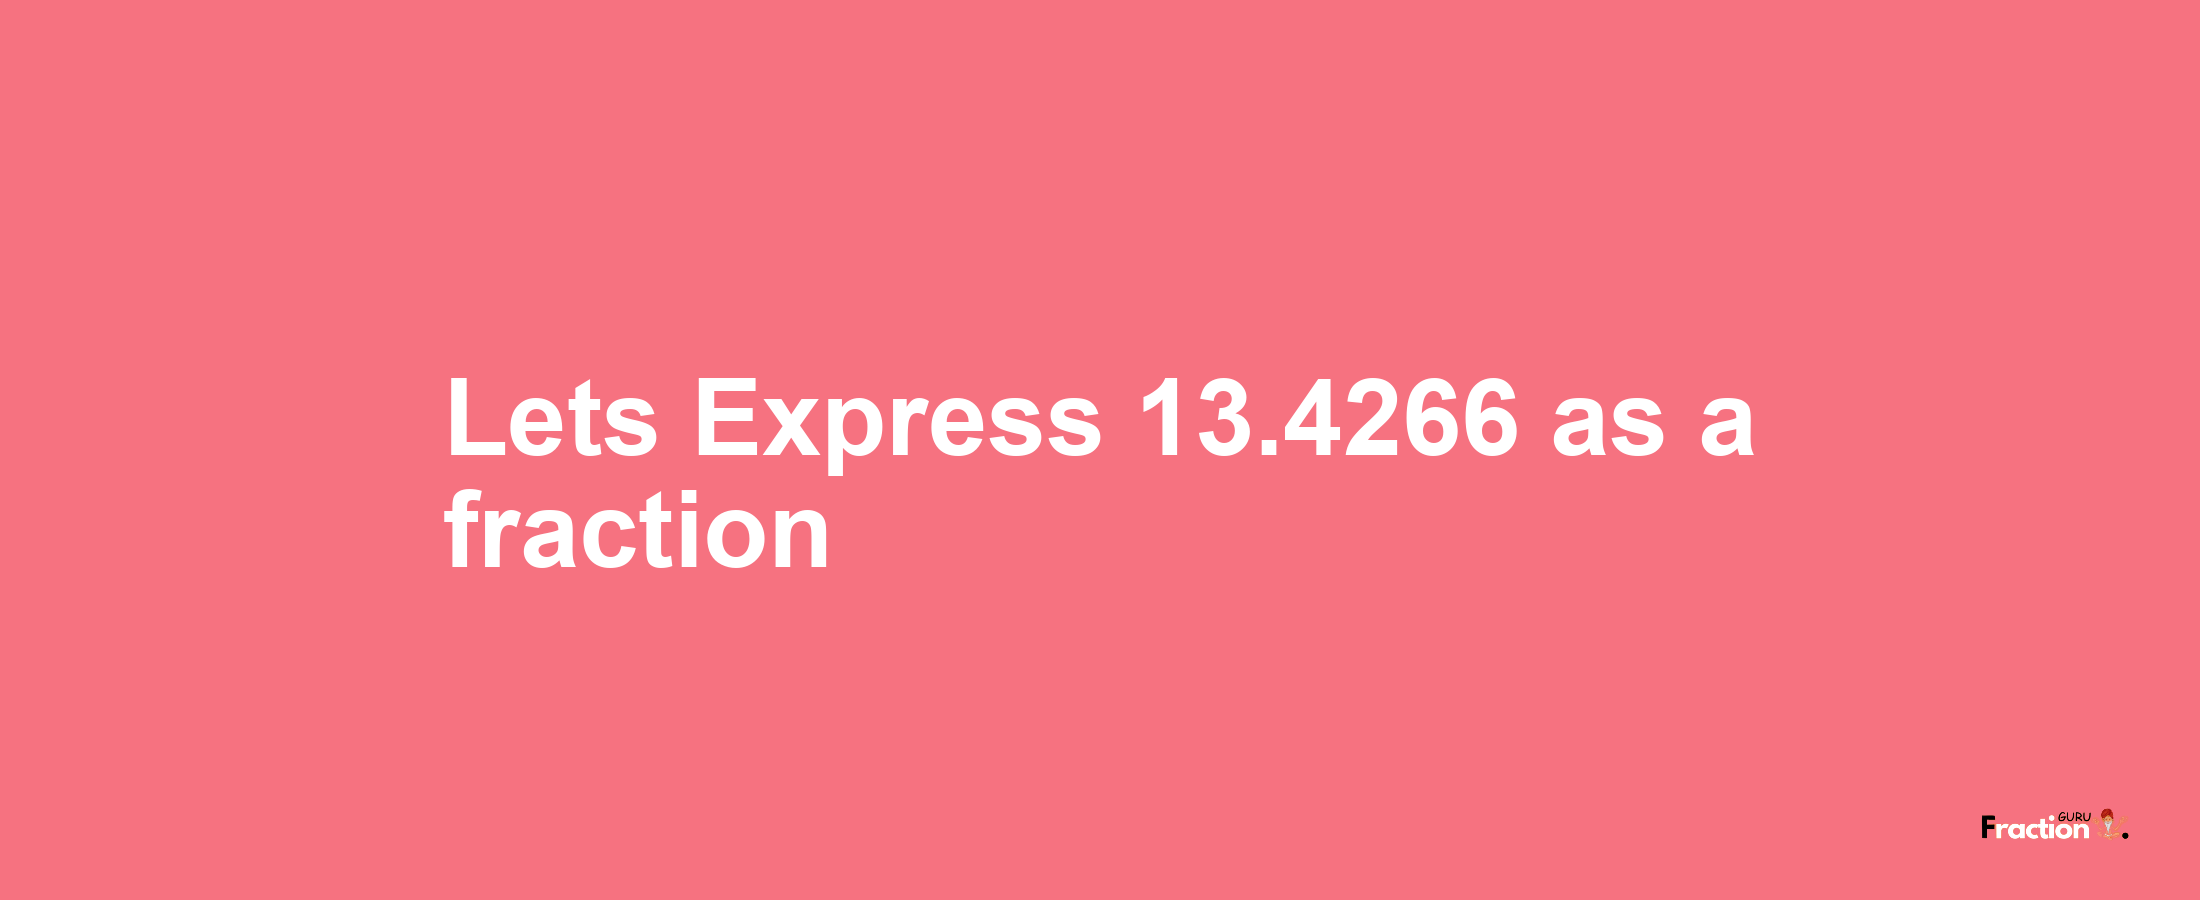 Lets Express 13.4266 as afraction